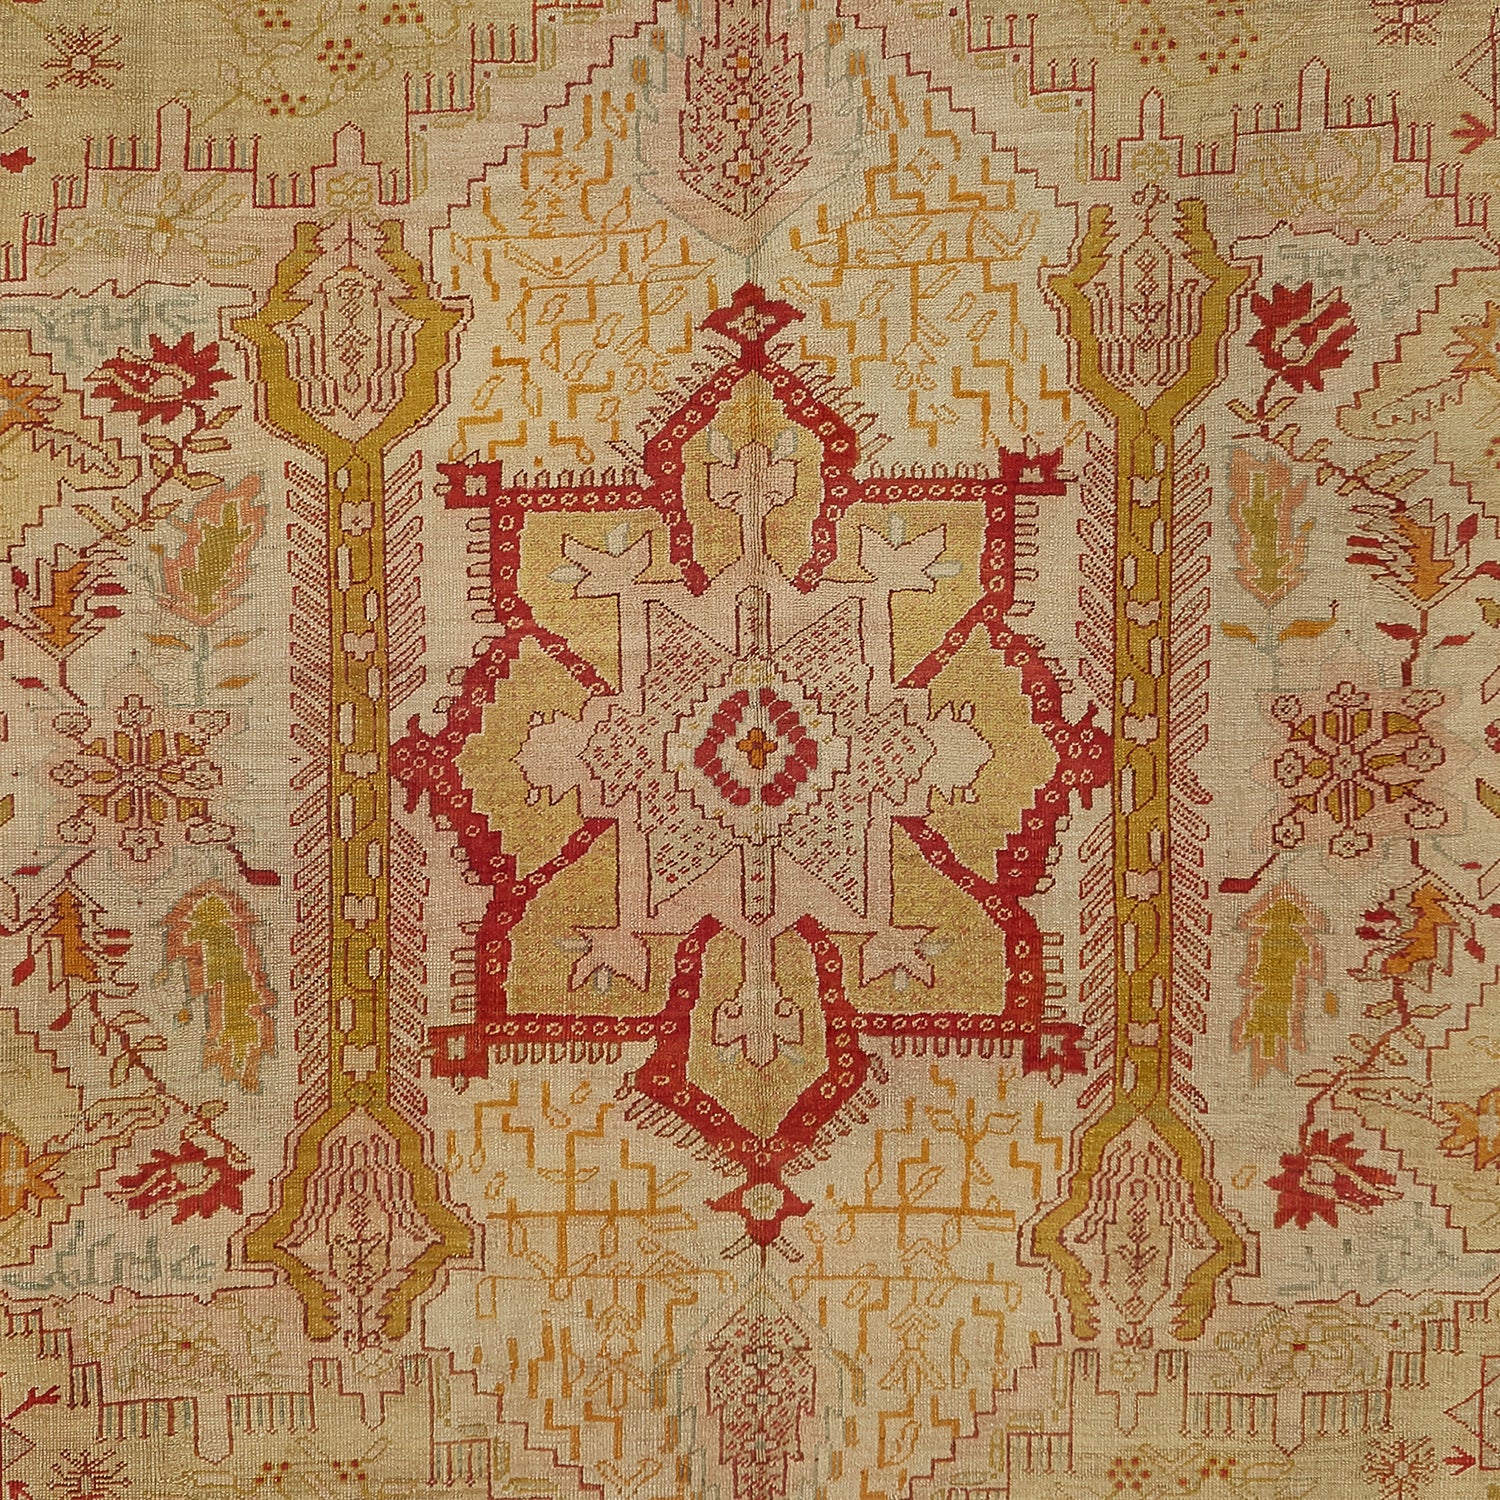 Intricate symmetrical rug with a central eight-pointed star medallion.